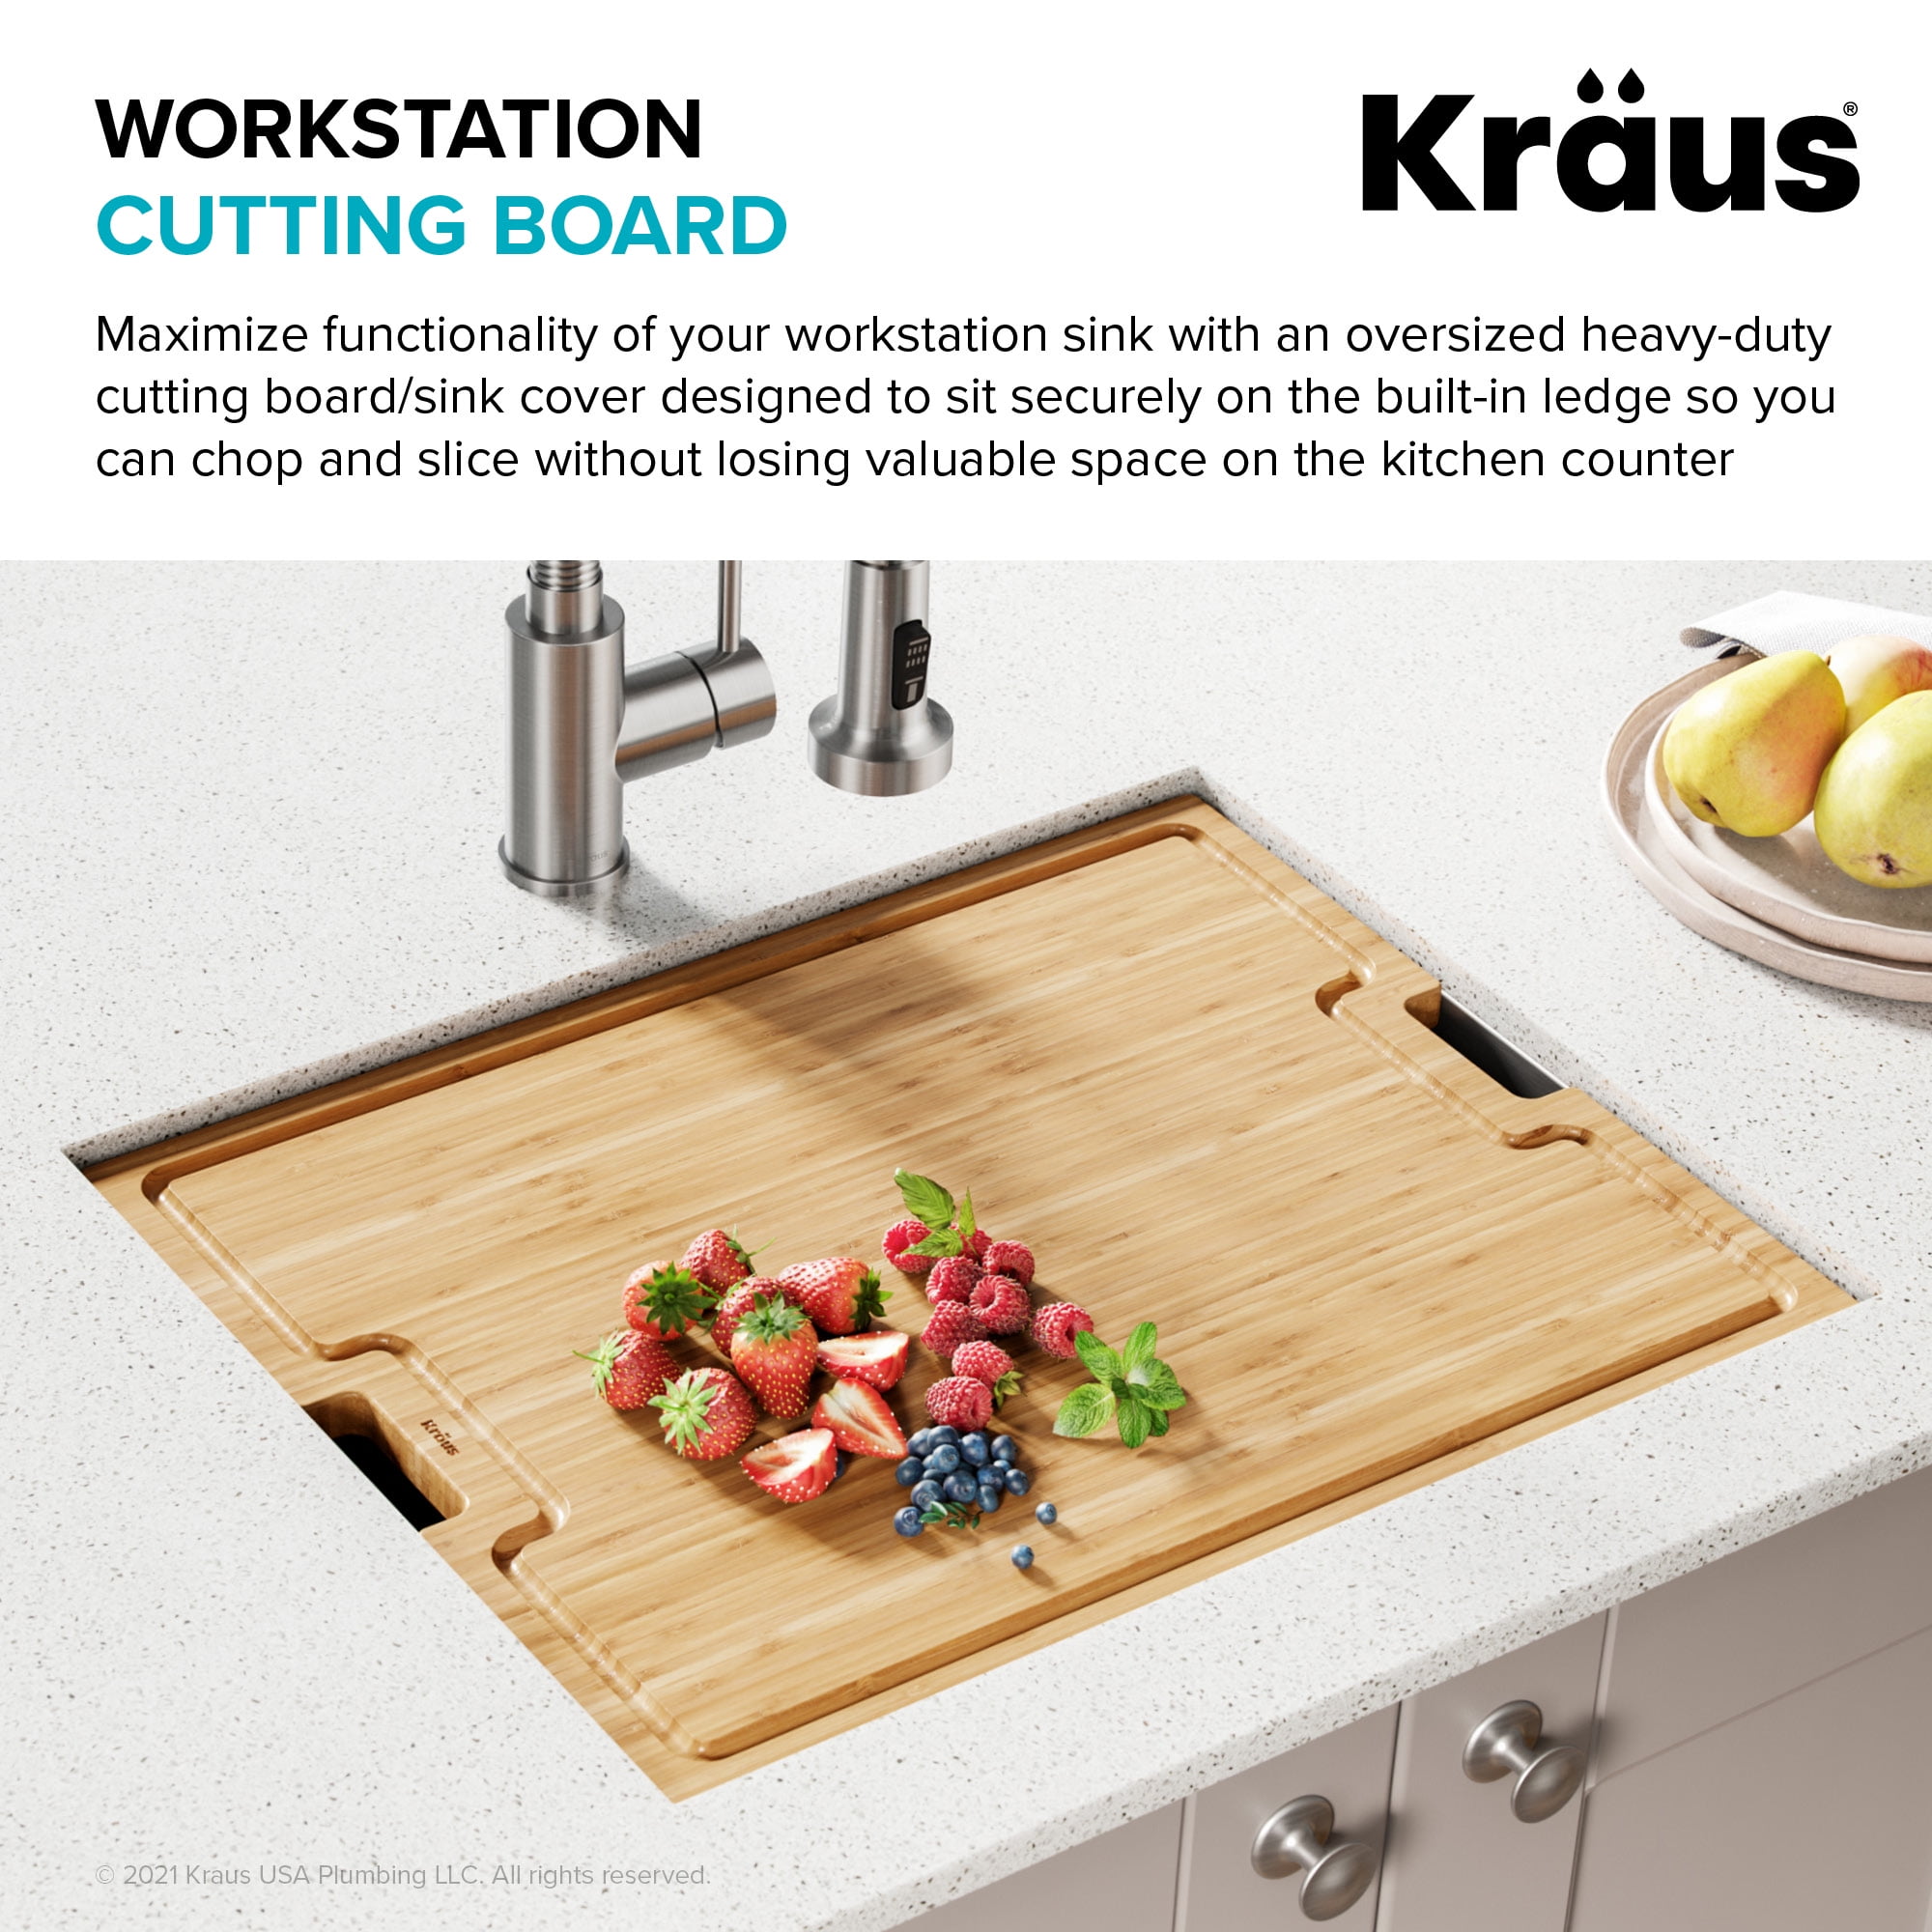 KRAUS Organic Solid Bamboo Cutting Board for Kitchen Sink 19.5 in. x 12 in.